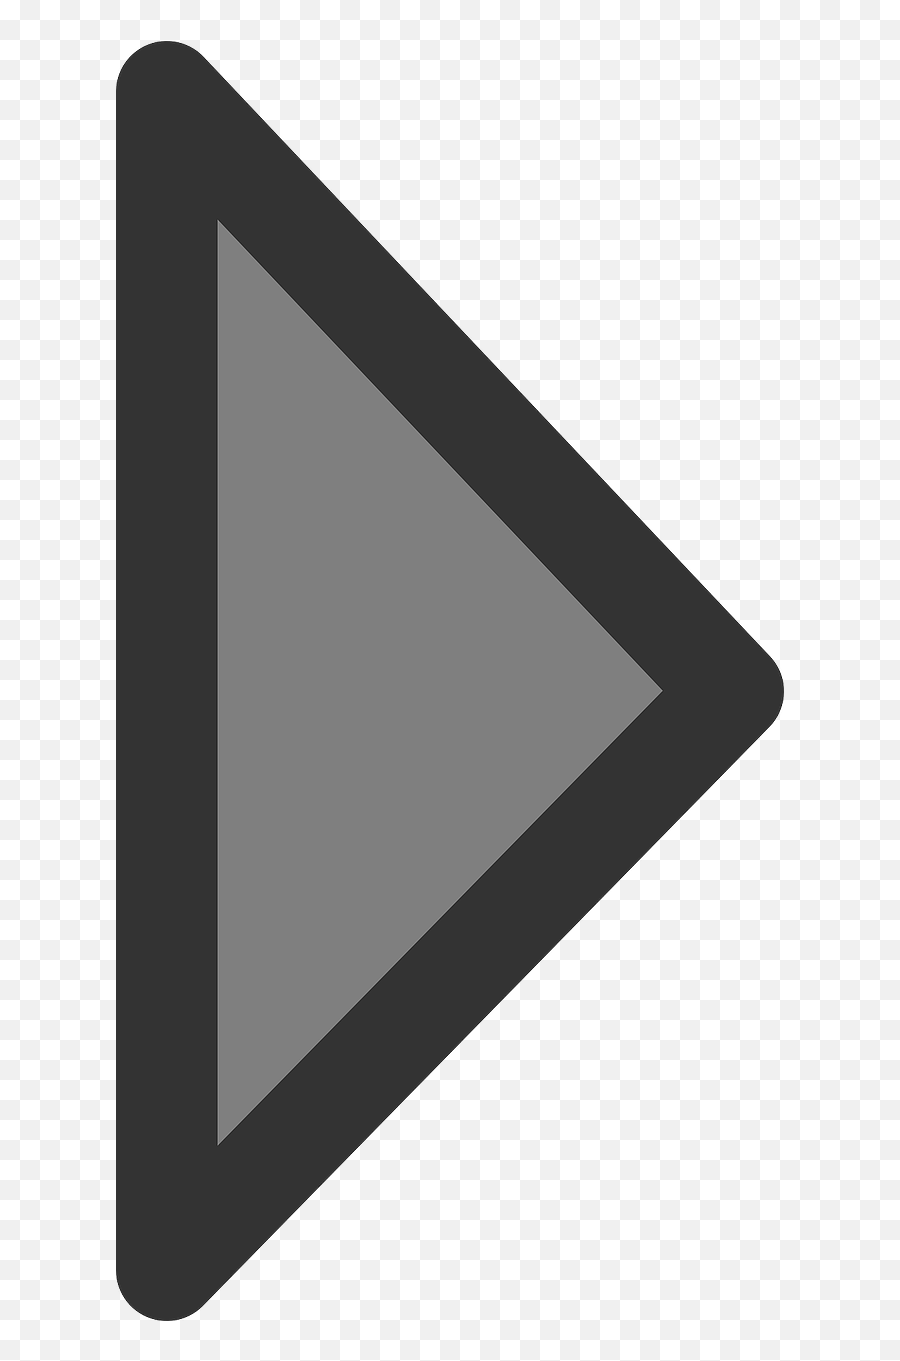 Right Arrow Sign - Free Vector Graphic On Pixabay Png Symbols Right Arrow,Sign Symbol Icon